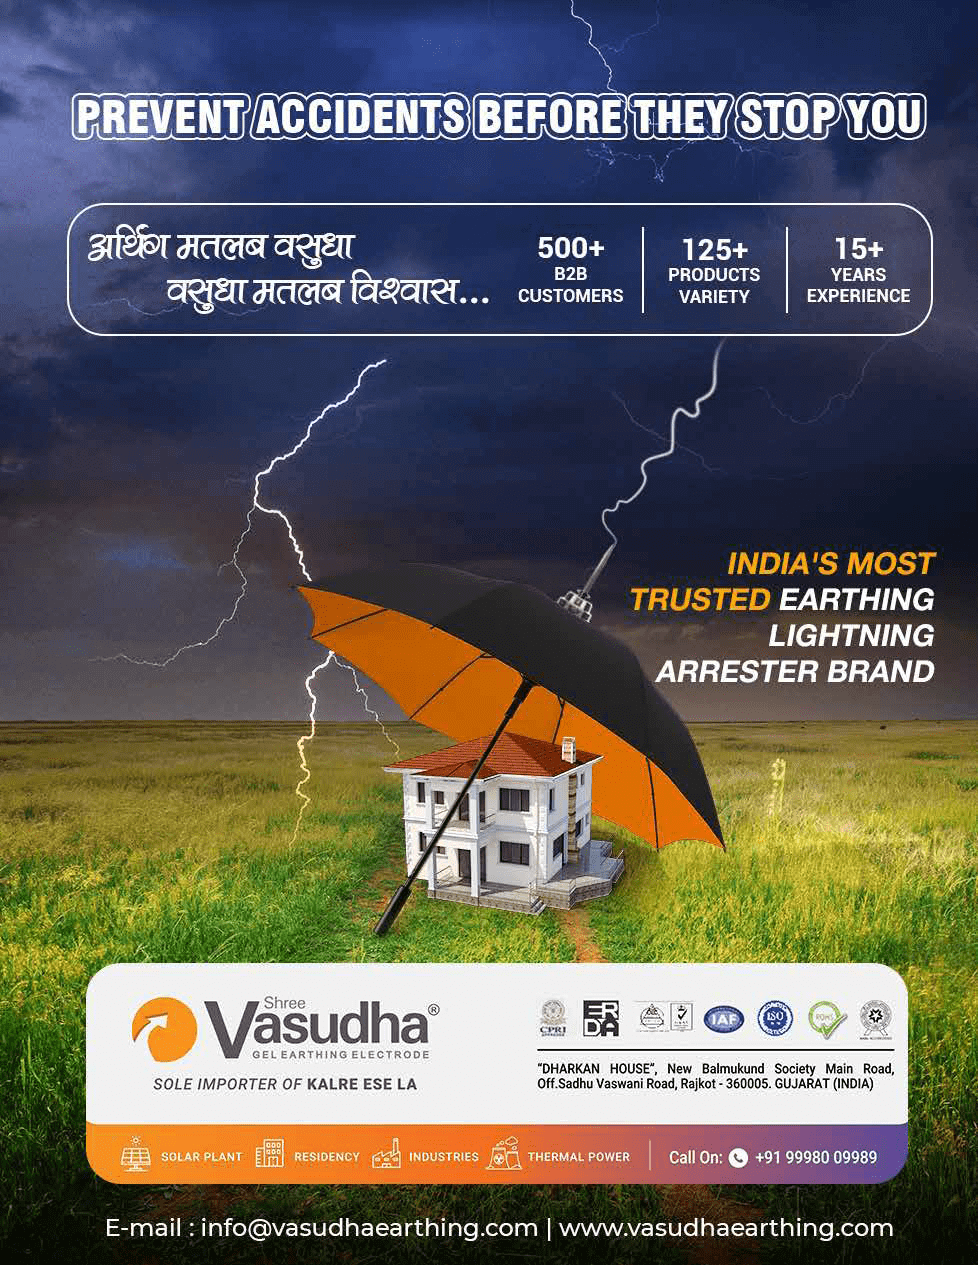 India's Most Trusted Earthing Lightning Arrester Brand